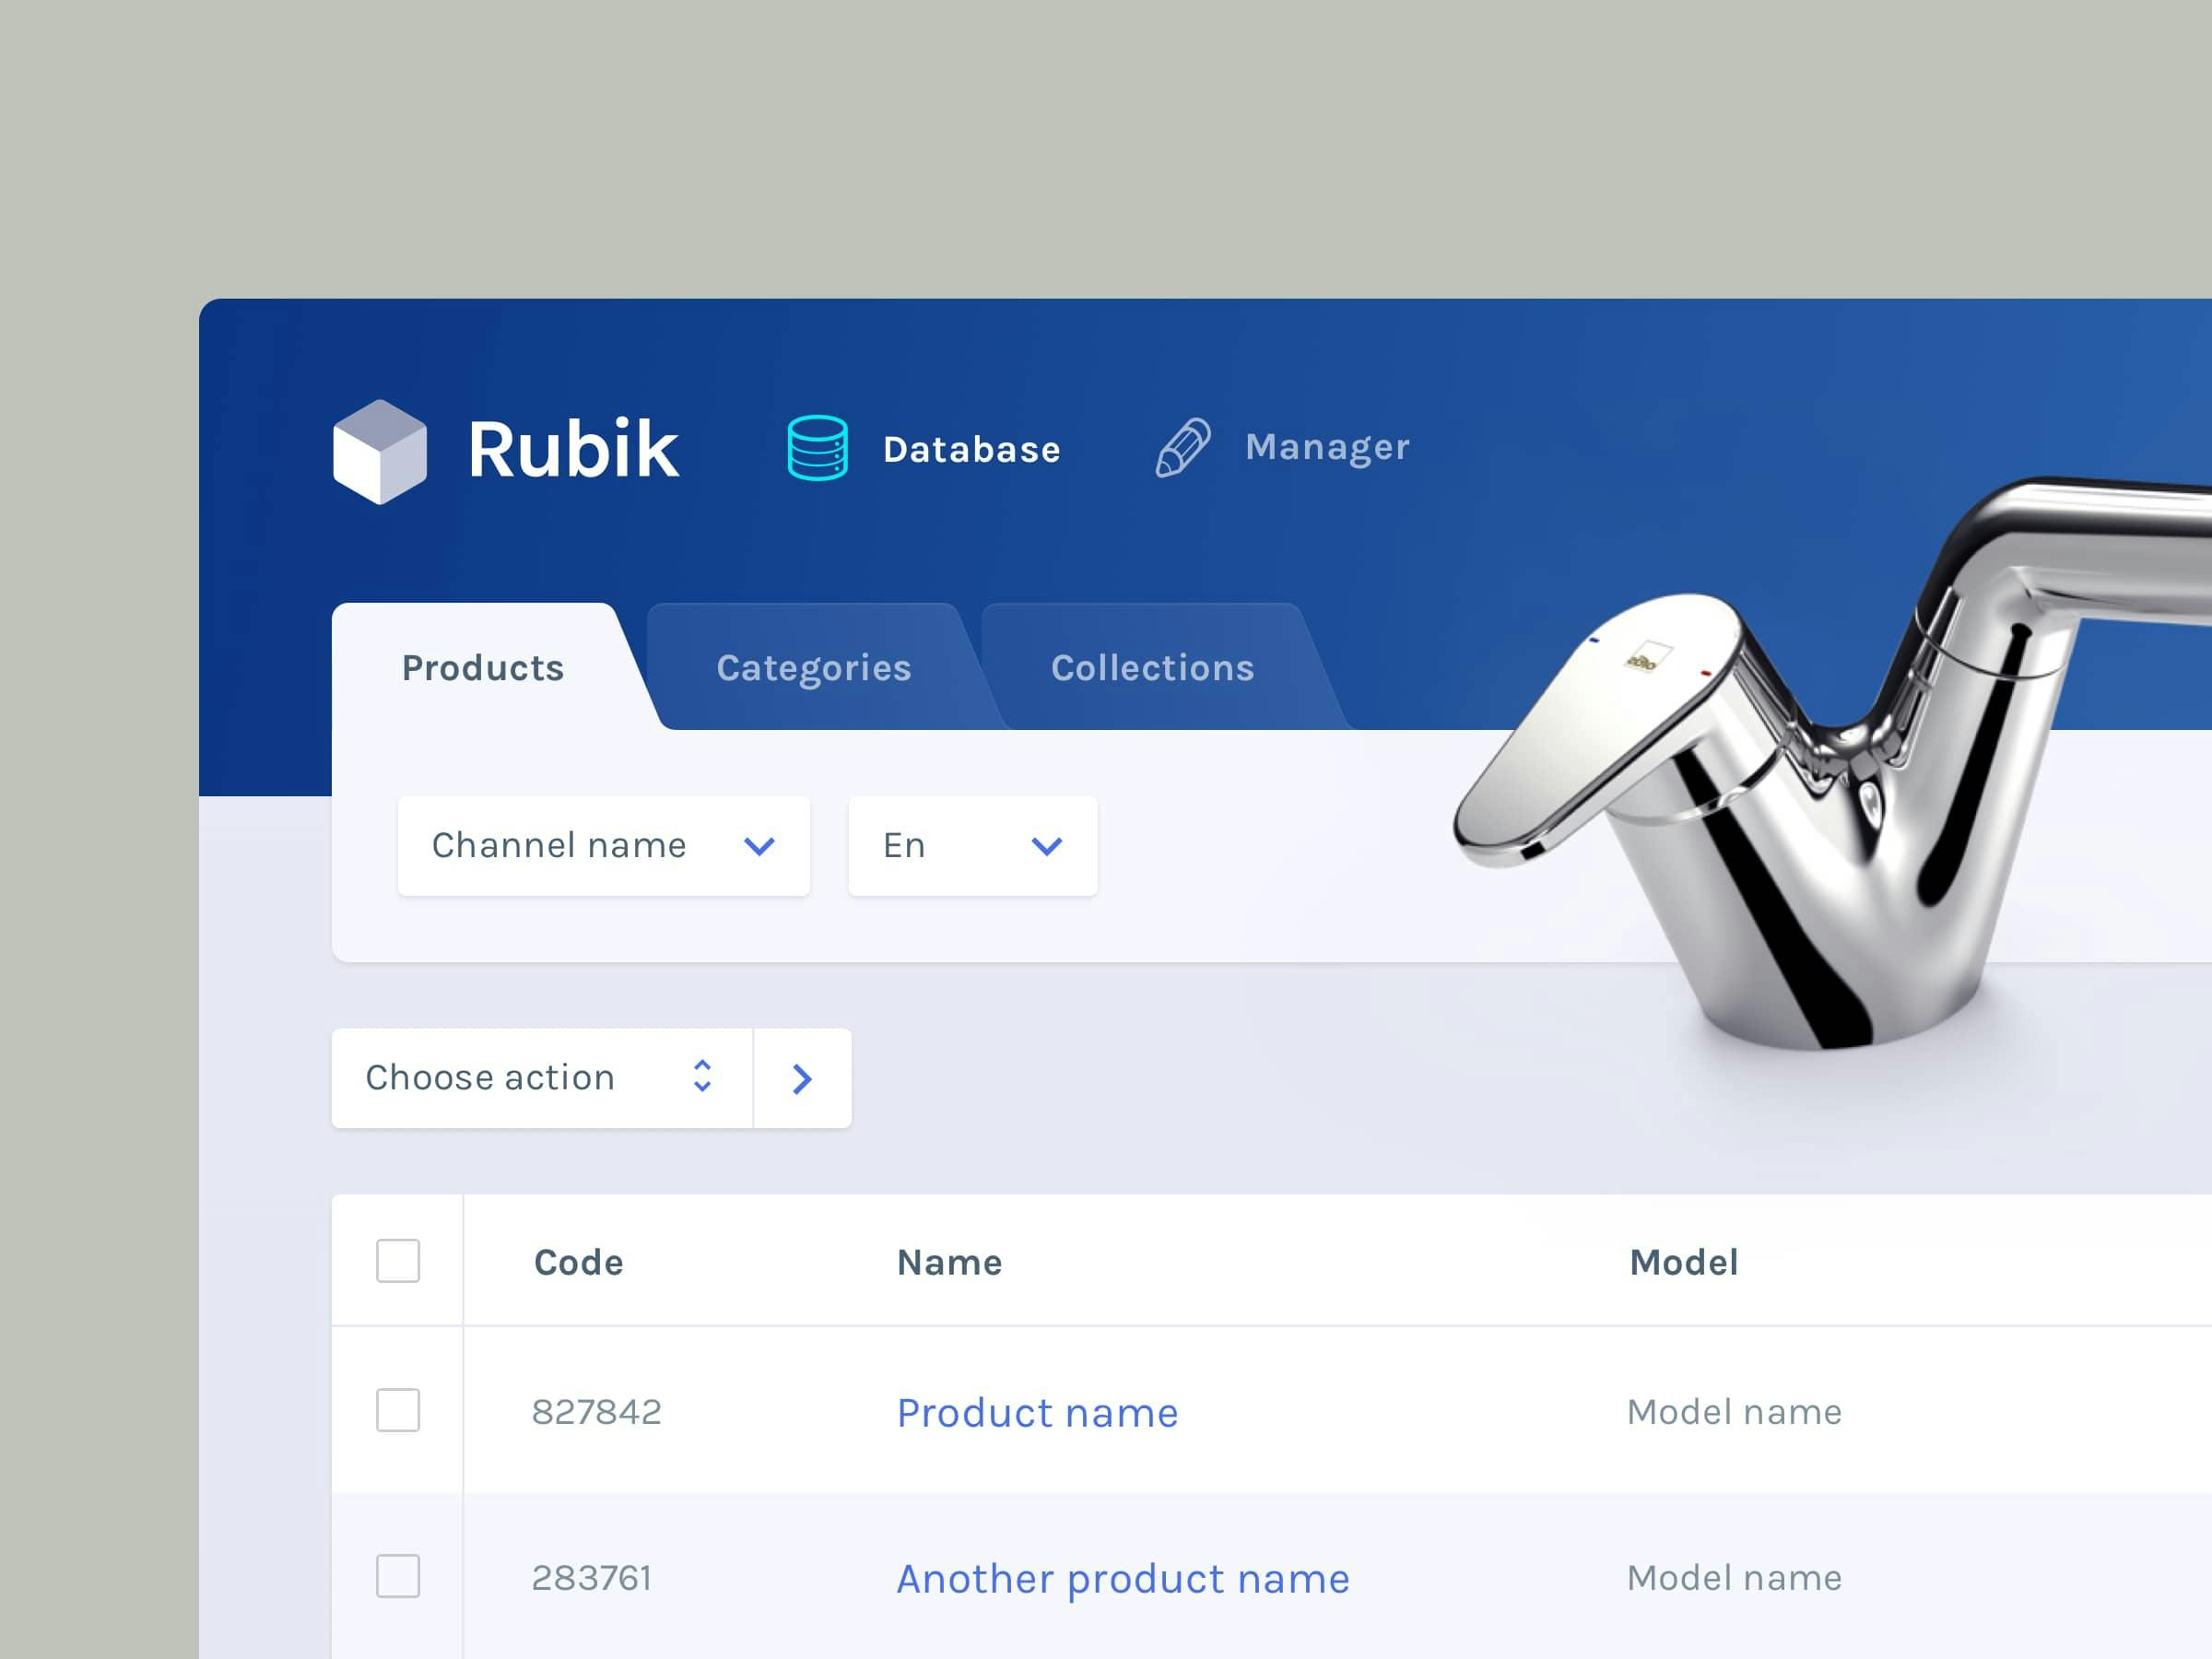 Rubik customized products page